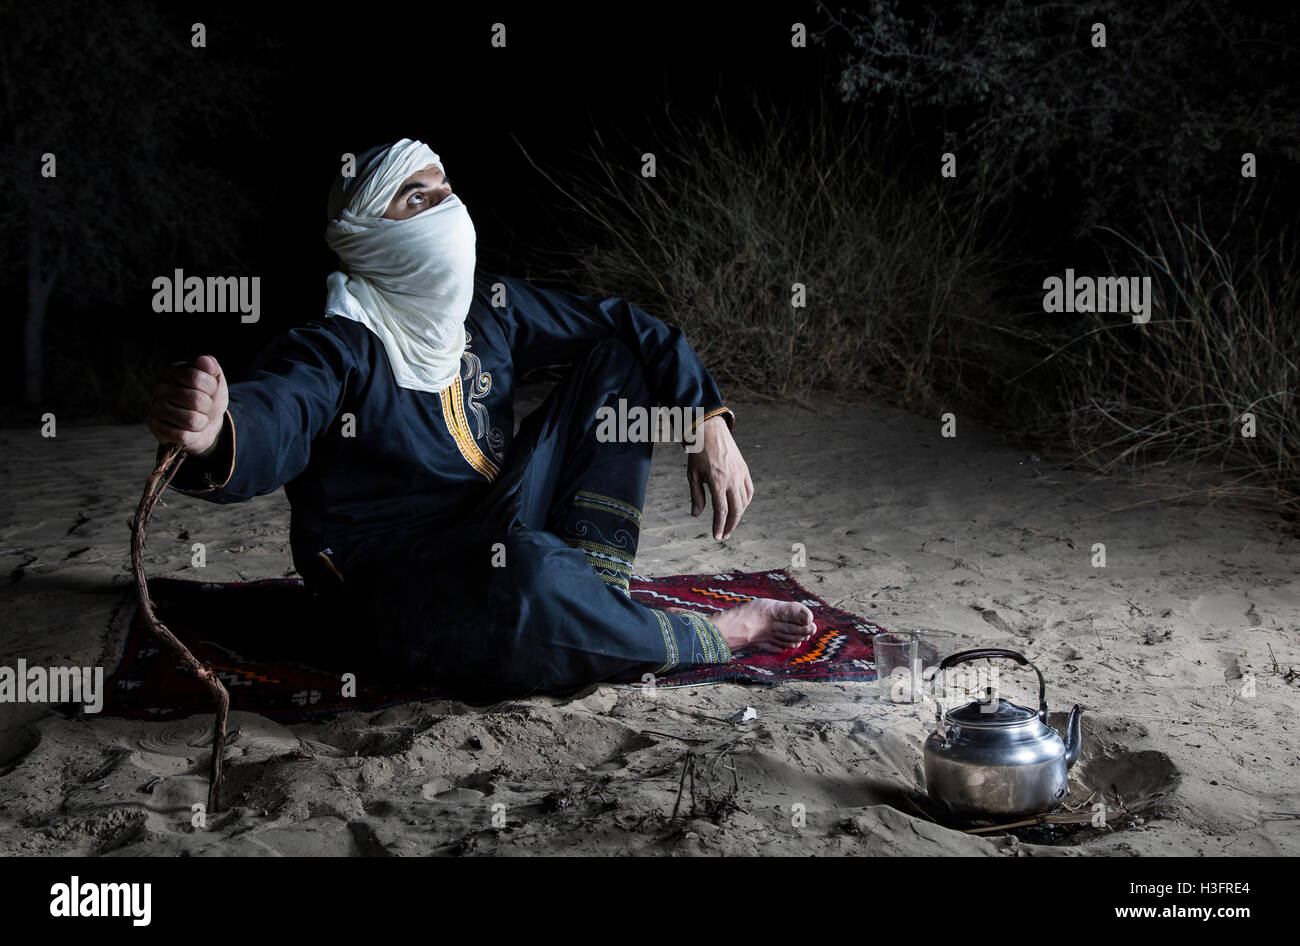 Man in traditional Tuareg outfit in a desert, preparing tea Stock Photo